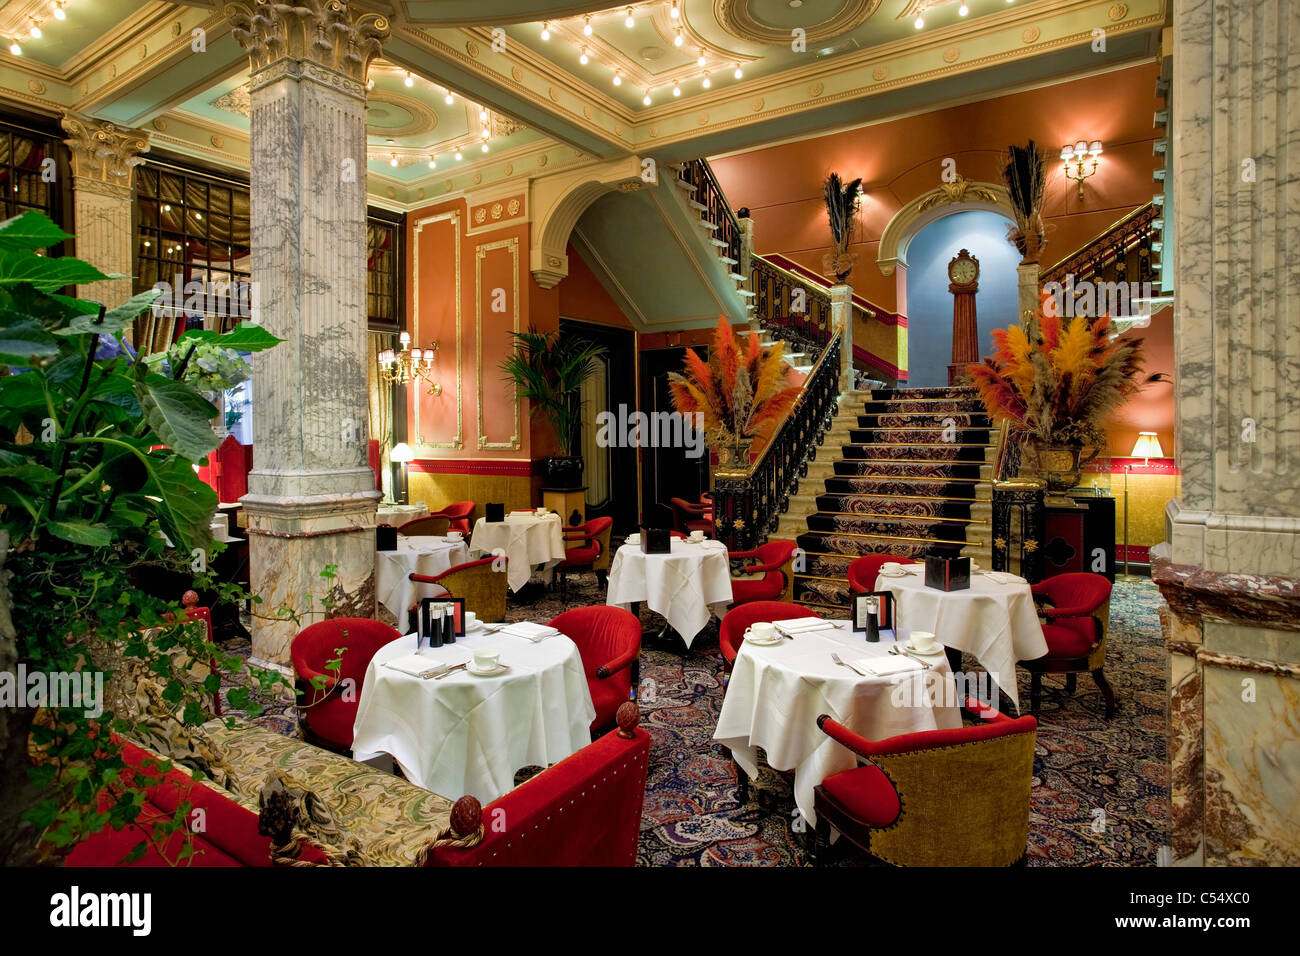 The Netherlands, The Hague, Den Haag, Hotel Des Indes, Interior, restaurant and stairs. Stock Photo